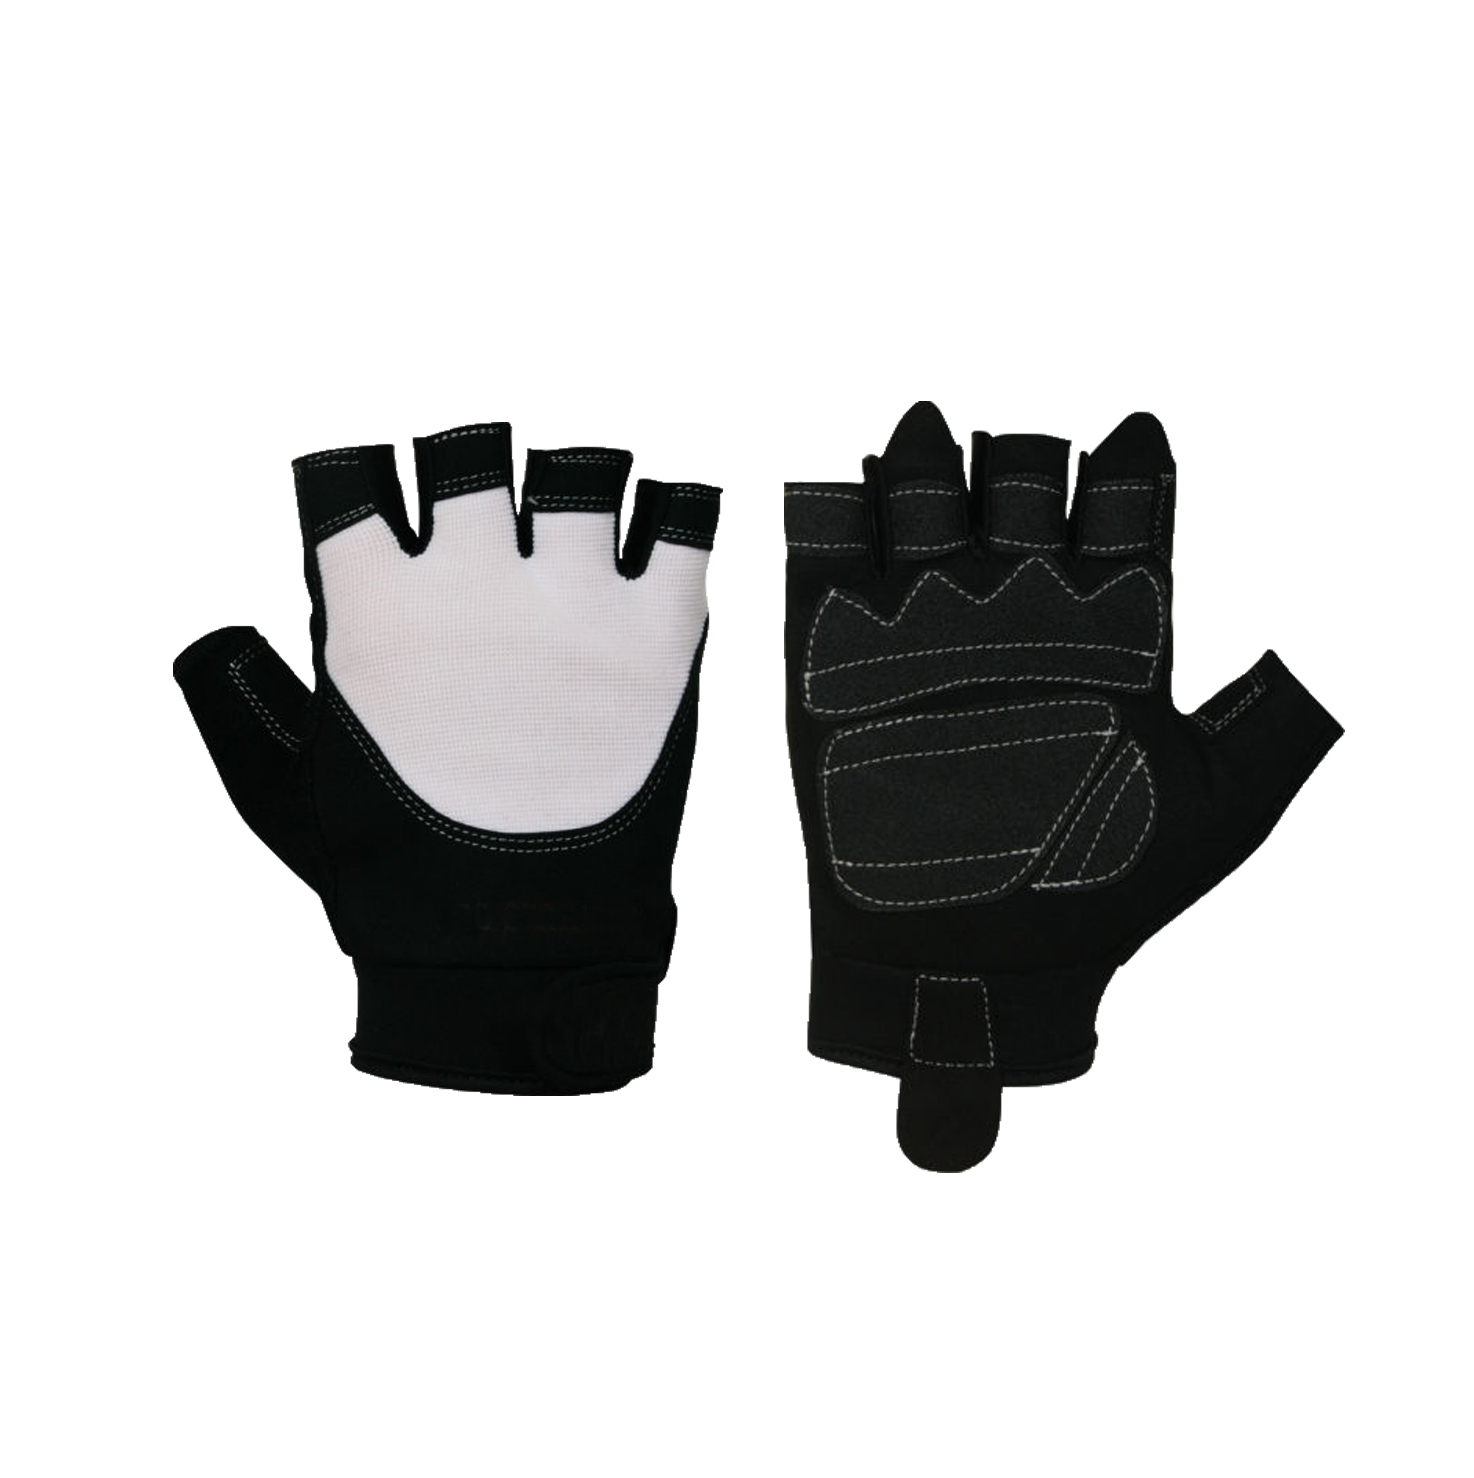 Hot sale Weight lifting gloves for sports fitness workout gloves